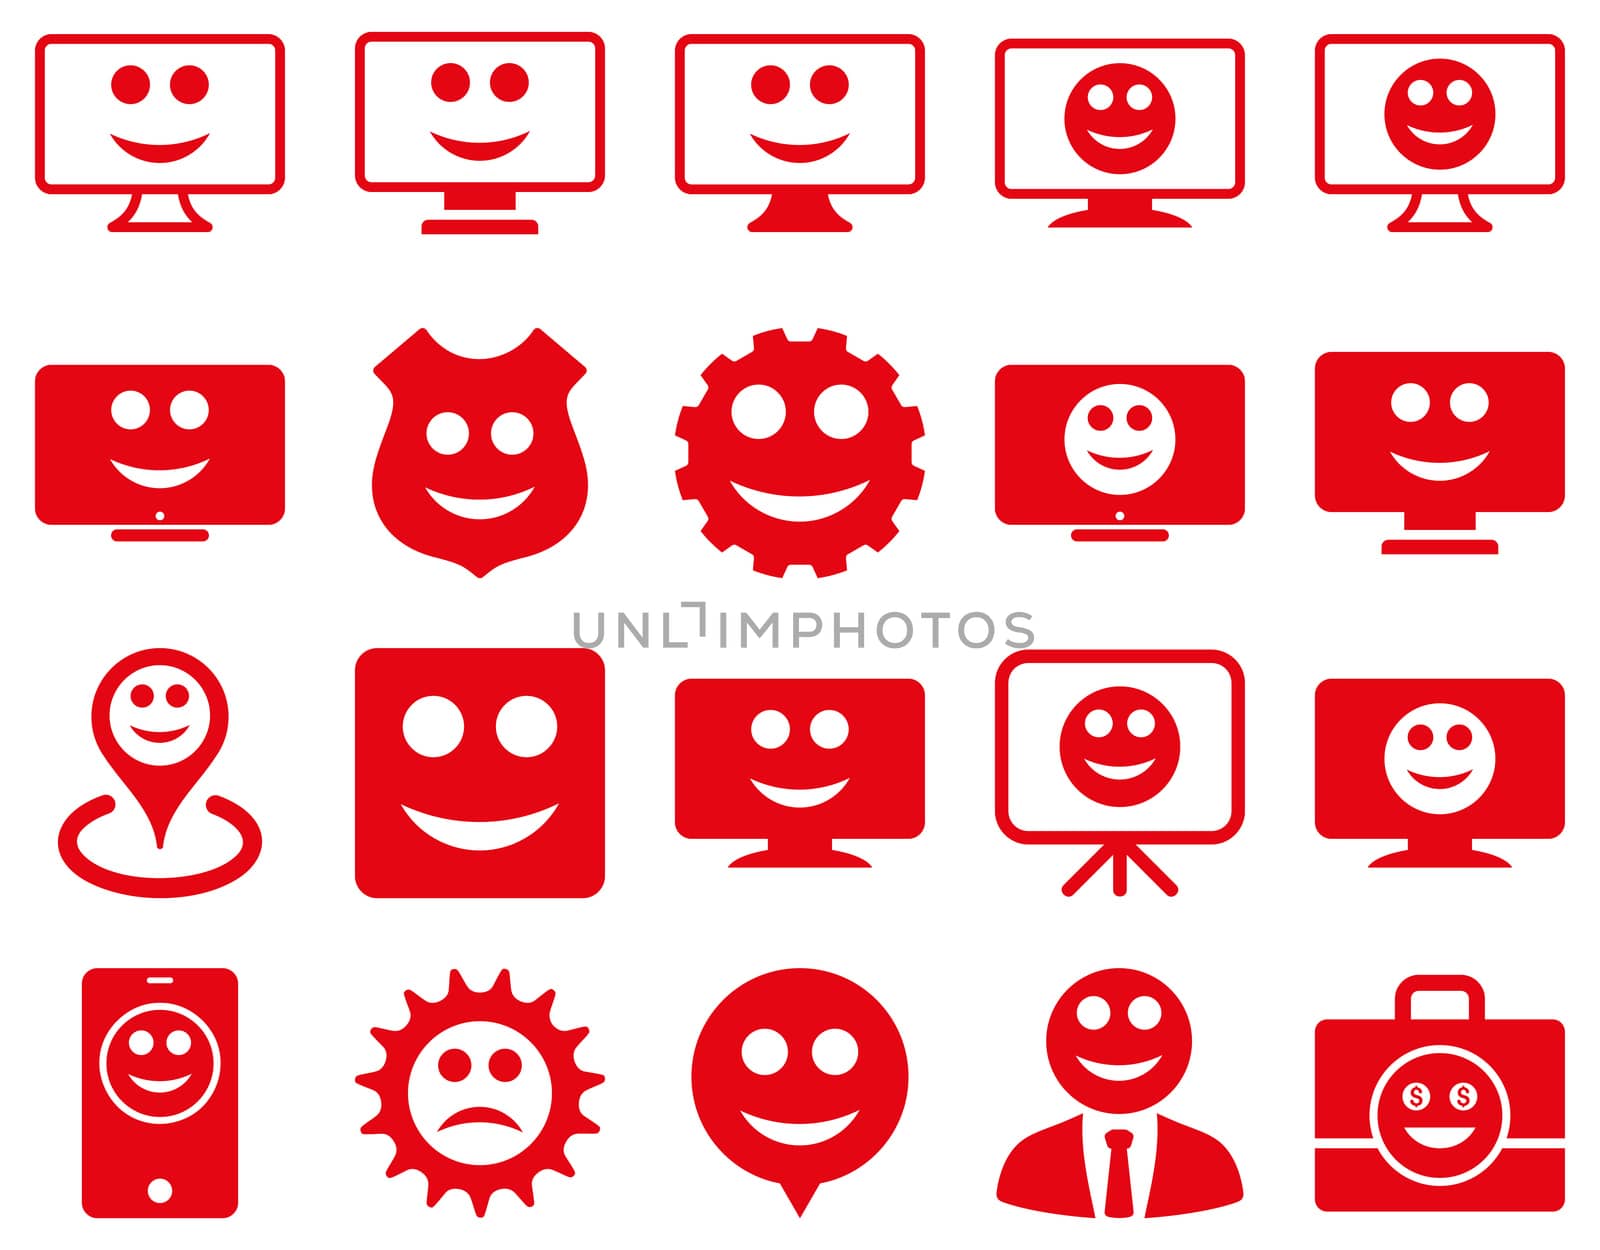 Tools, gears, smiles, dilspays icons. Glyph set style is flat images, red symbols, isolated on a white background.